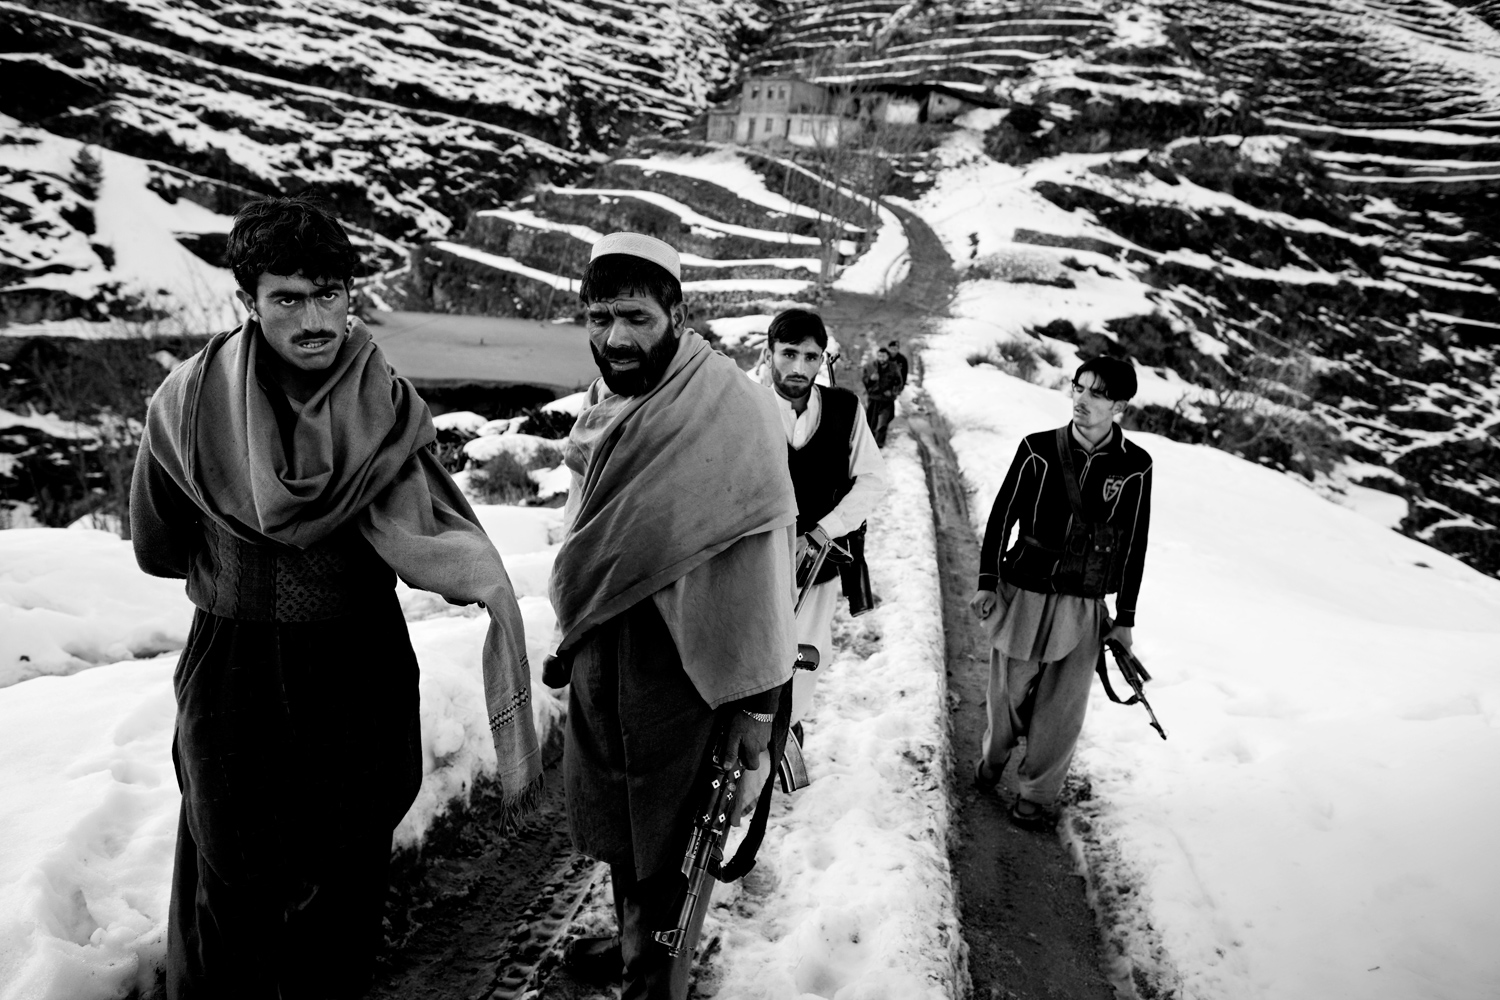 Pakistan, Swat Valley, Mahnbanr (Tehsil Qilagai) near the Dir border, March 2011. Armed Lashkar members performing pehra on a snow-covered road that leads to the populated area of Mahnbanr in Qilagai Teshil. Communication gaps due to the bad condition of the road isolate the Lashkars during winter, making their task of defending the area more difficult.